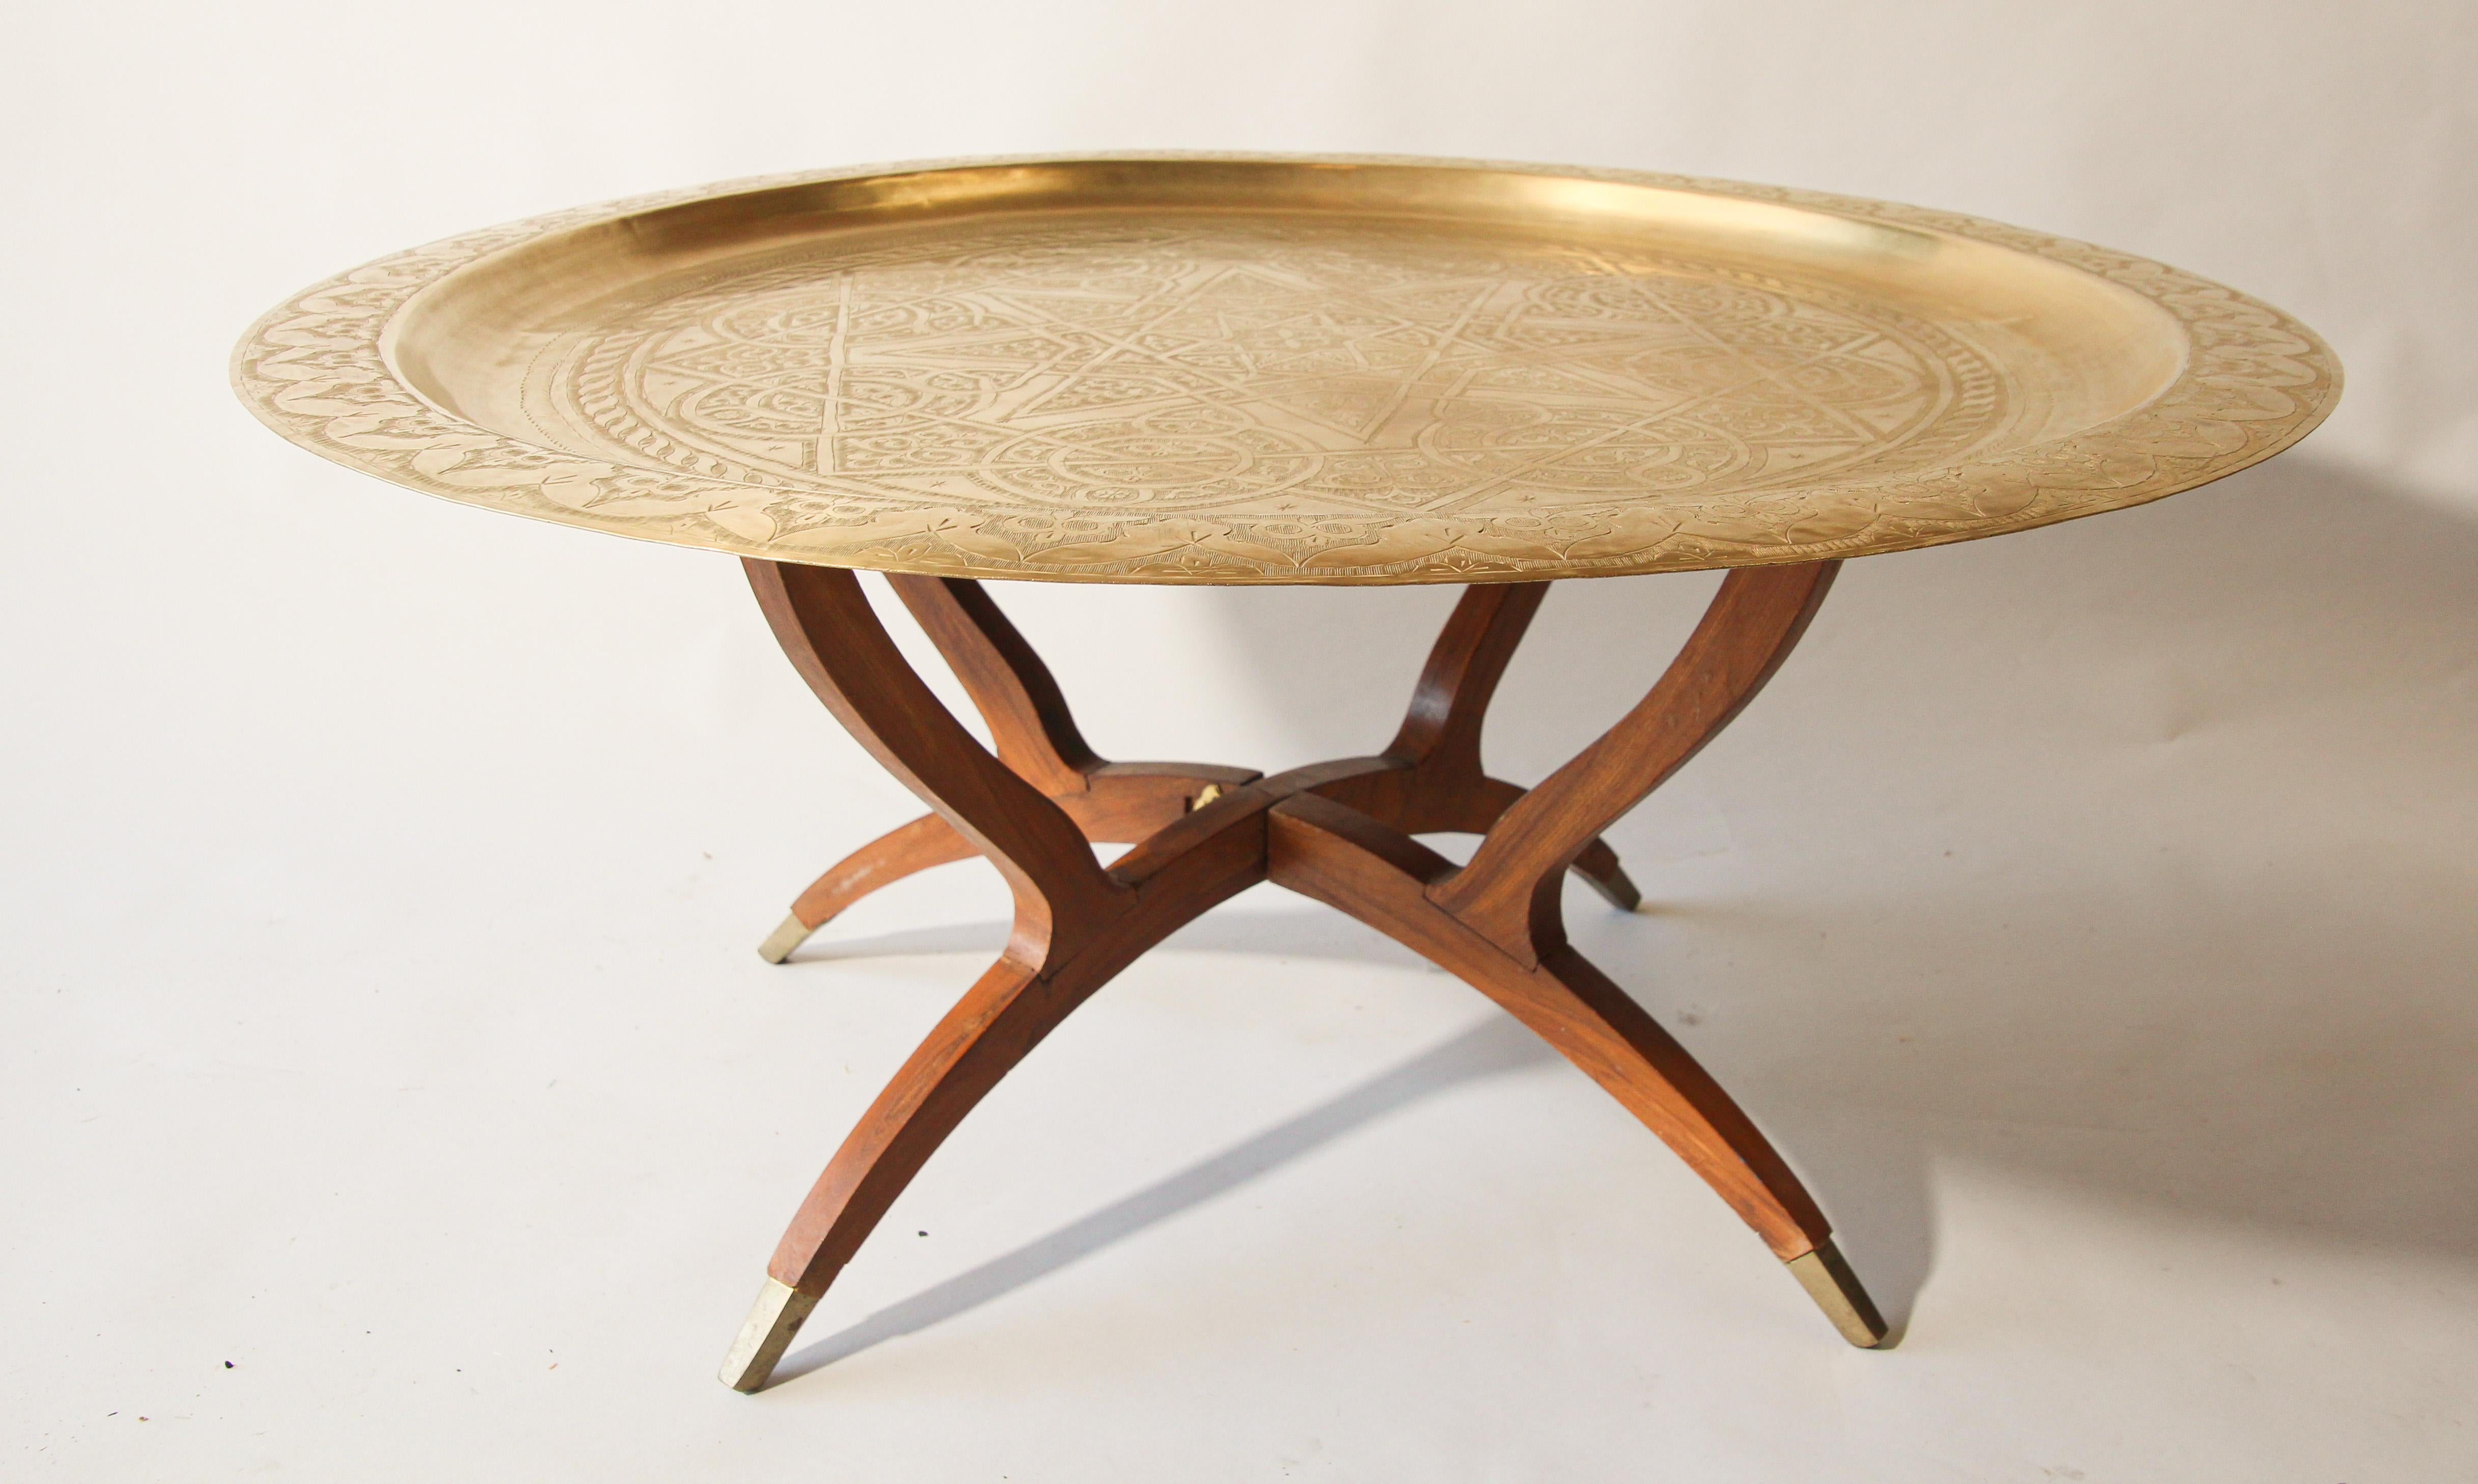 Hammered Moroccan Round Brass Tray Table on Folding Stand